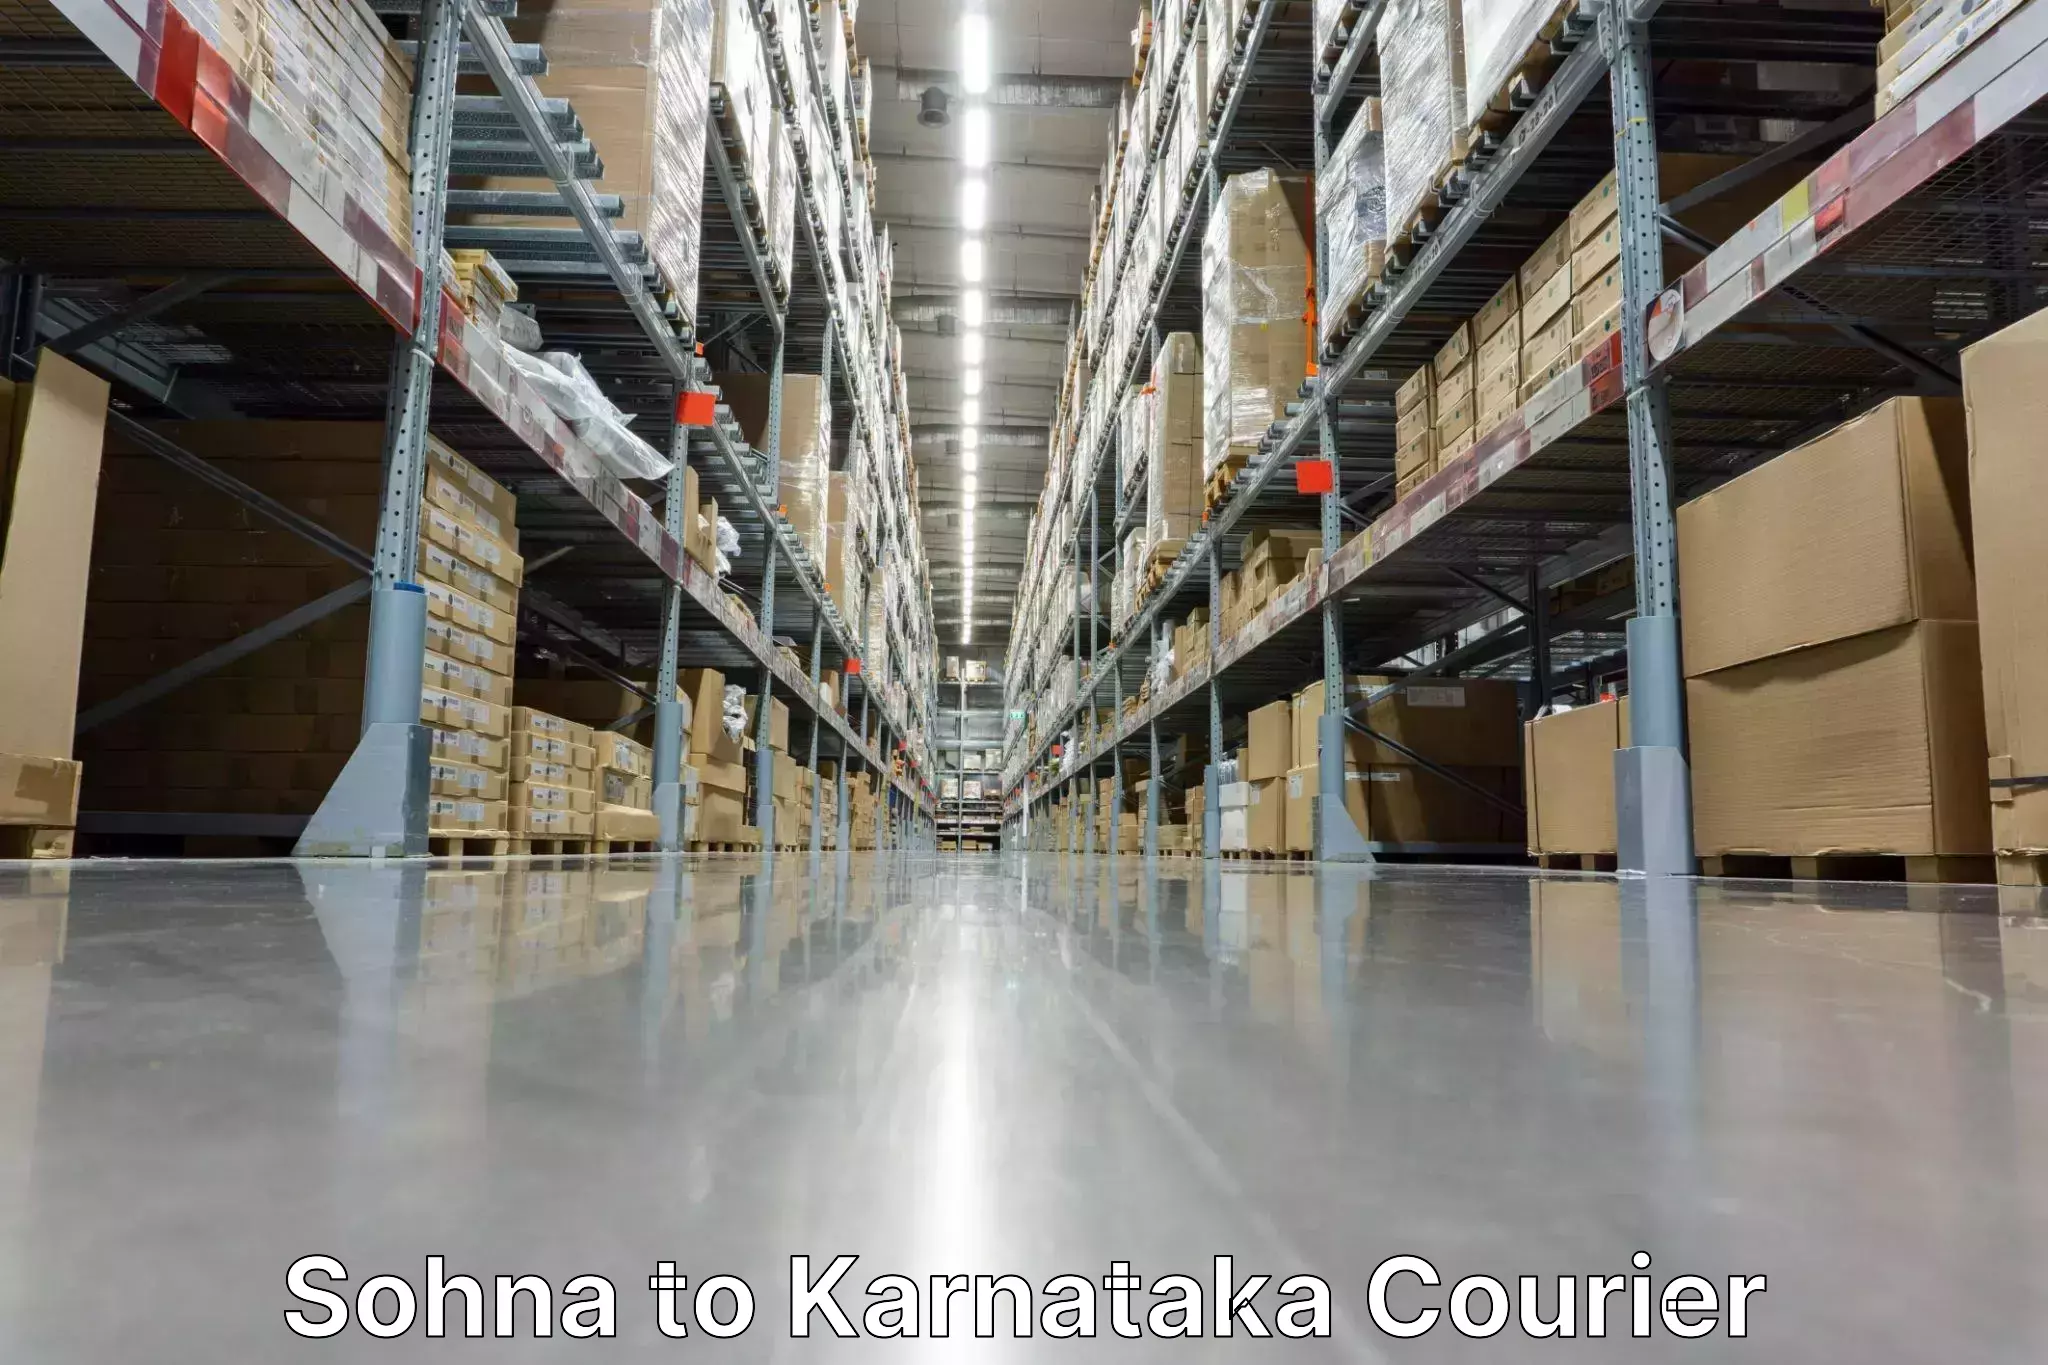 Quality courier services in Sohna to Karnataka